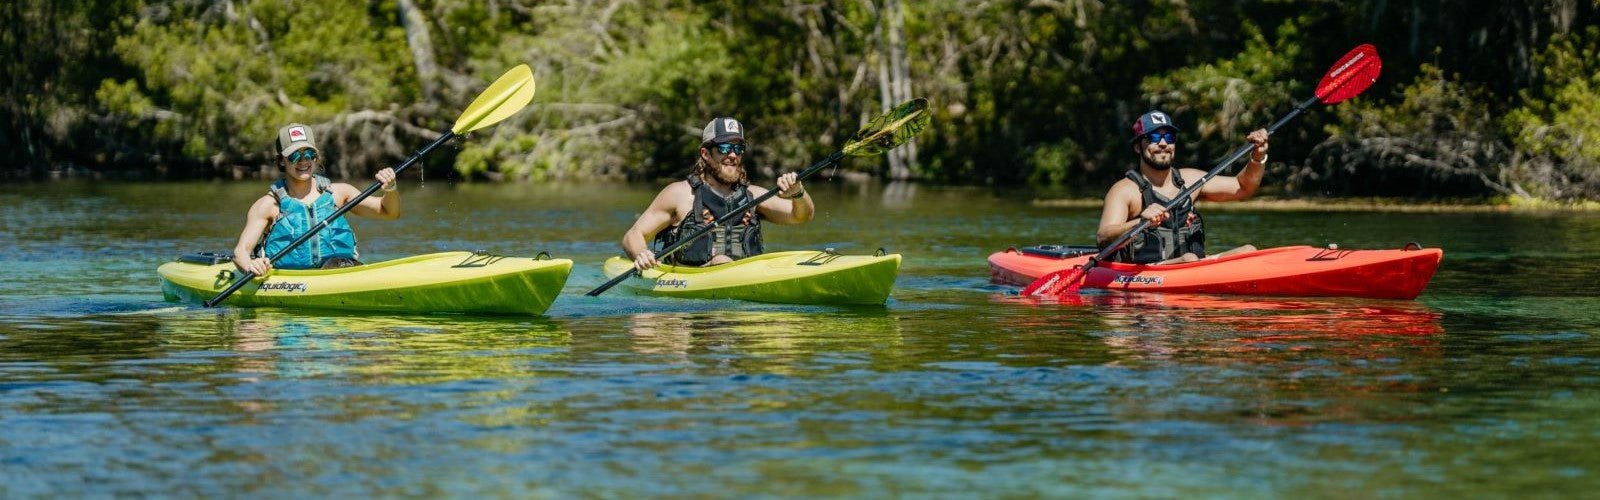 Top 3 Recreational Kayaks: A Comparative Review